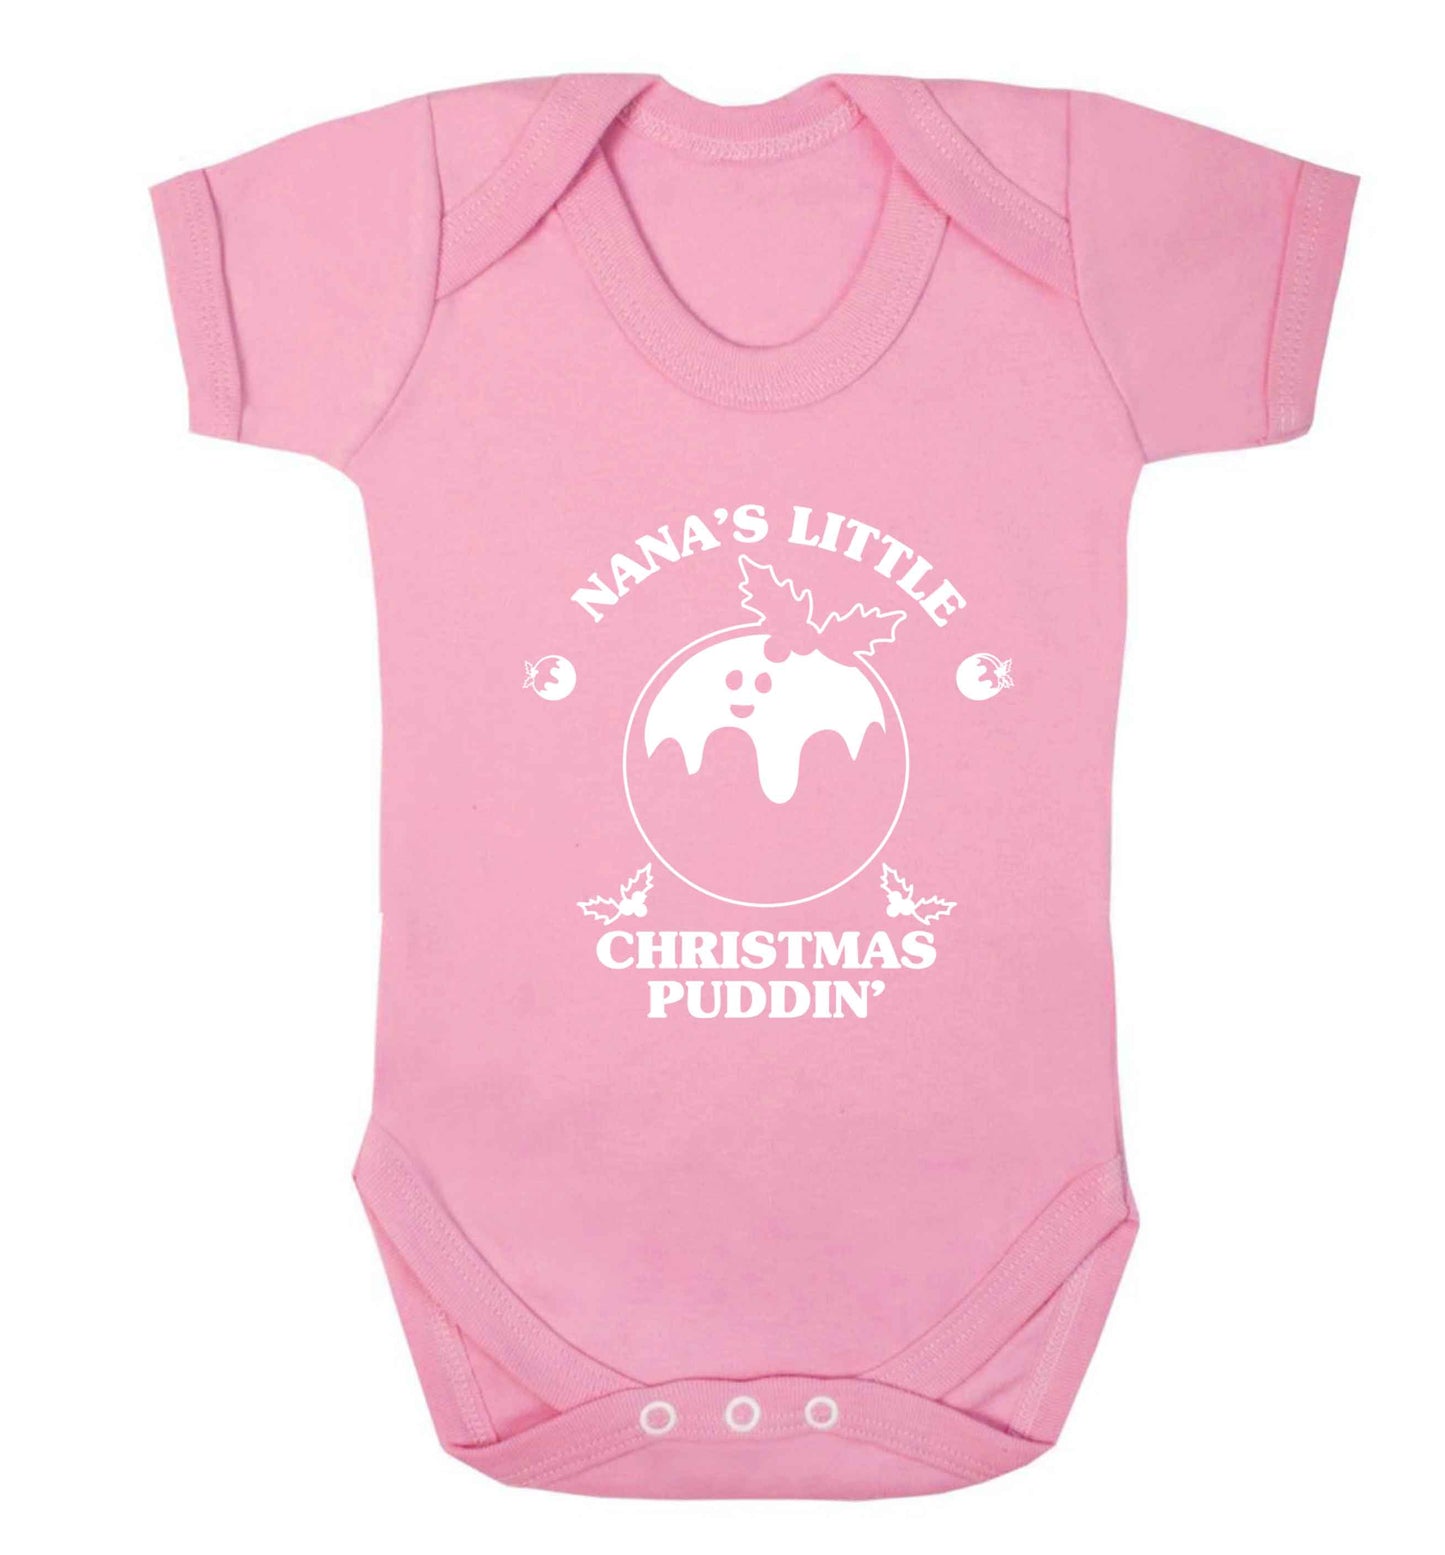 Nana's little Christmas puddin' Baby Vest pale pink 18-24 months